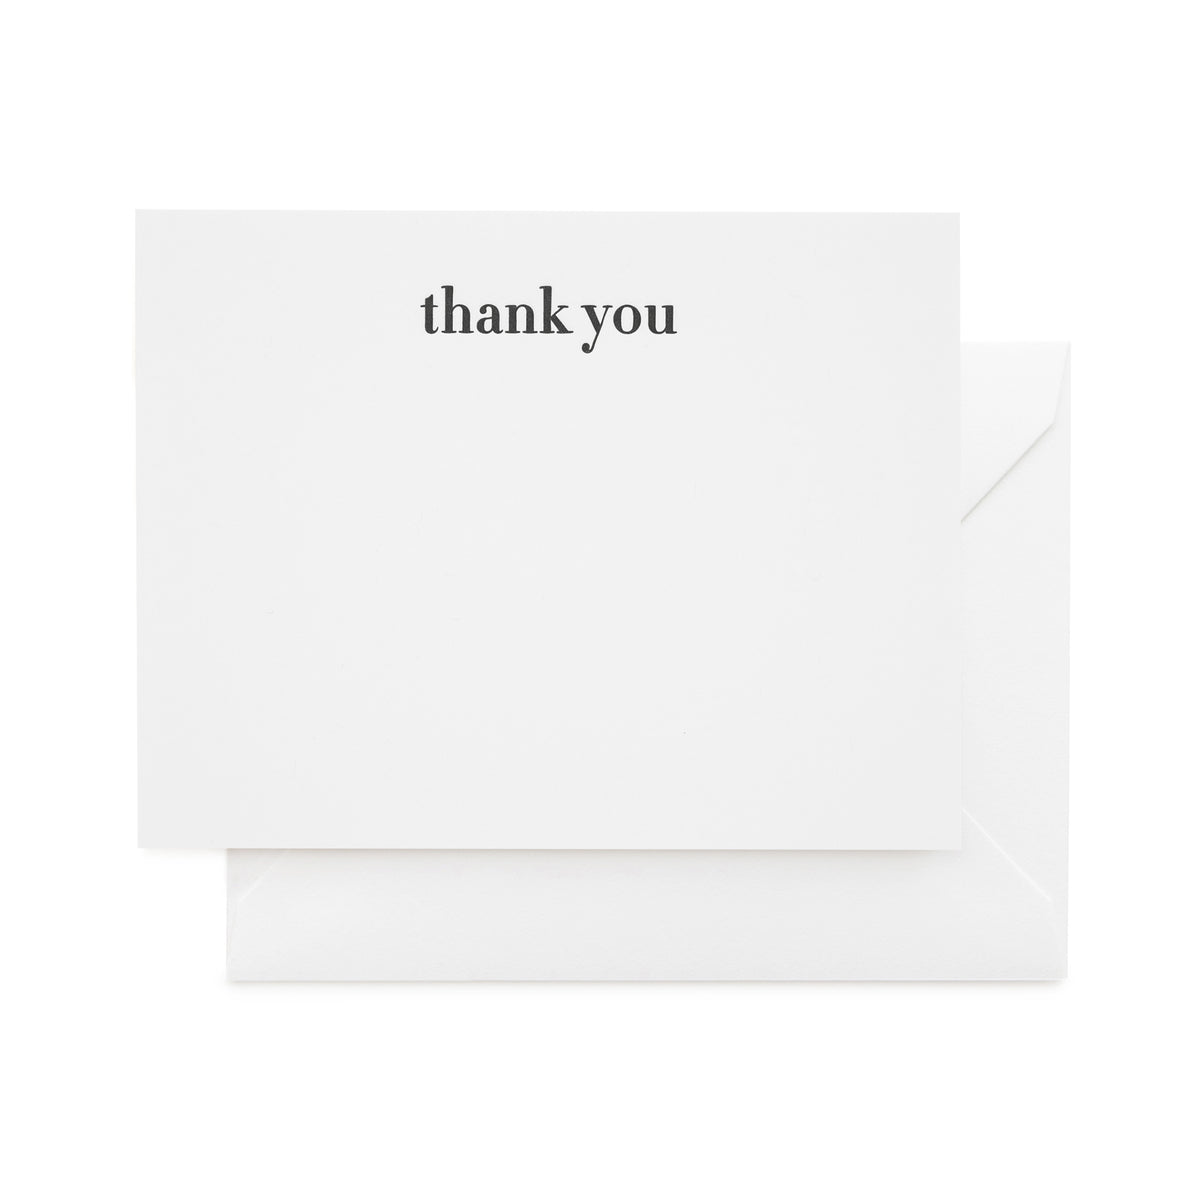 white card with black thank you text and white envelope